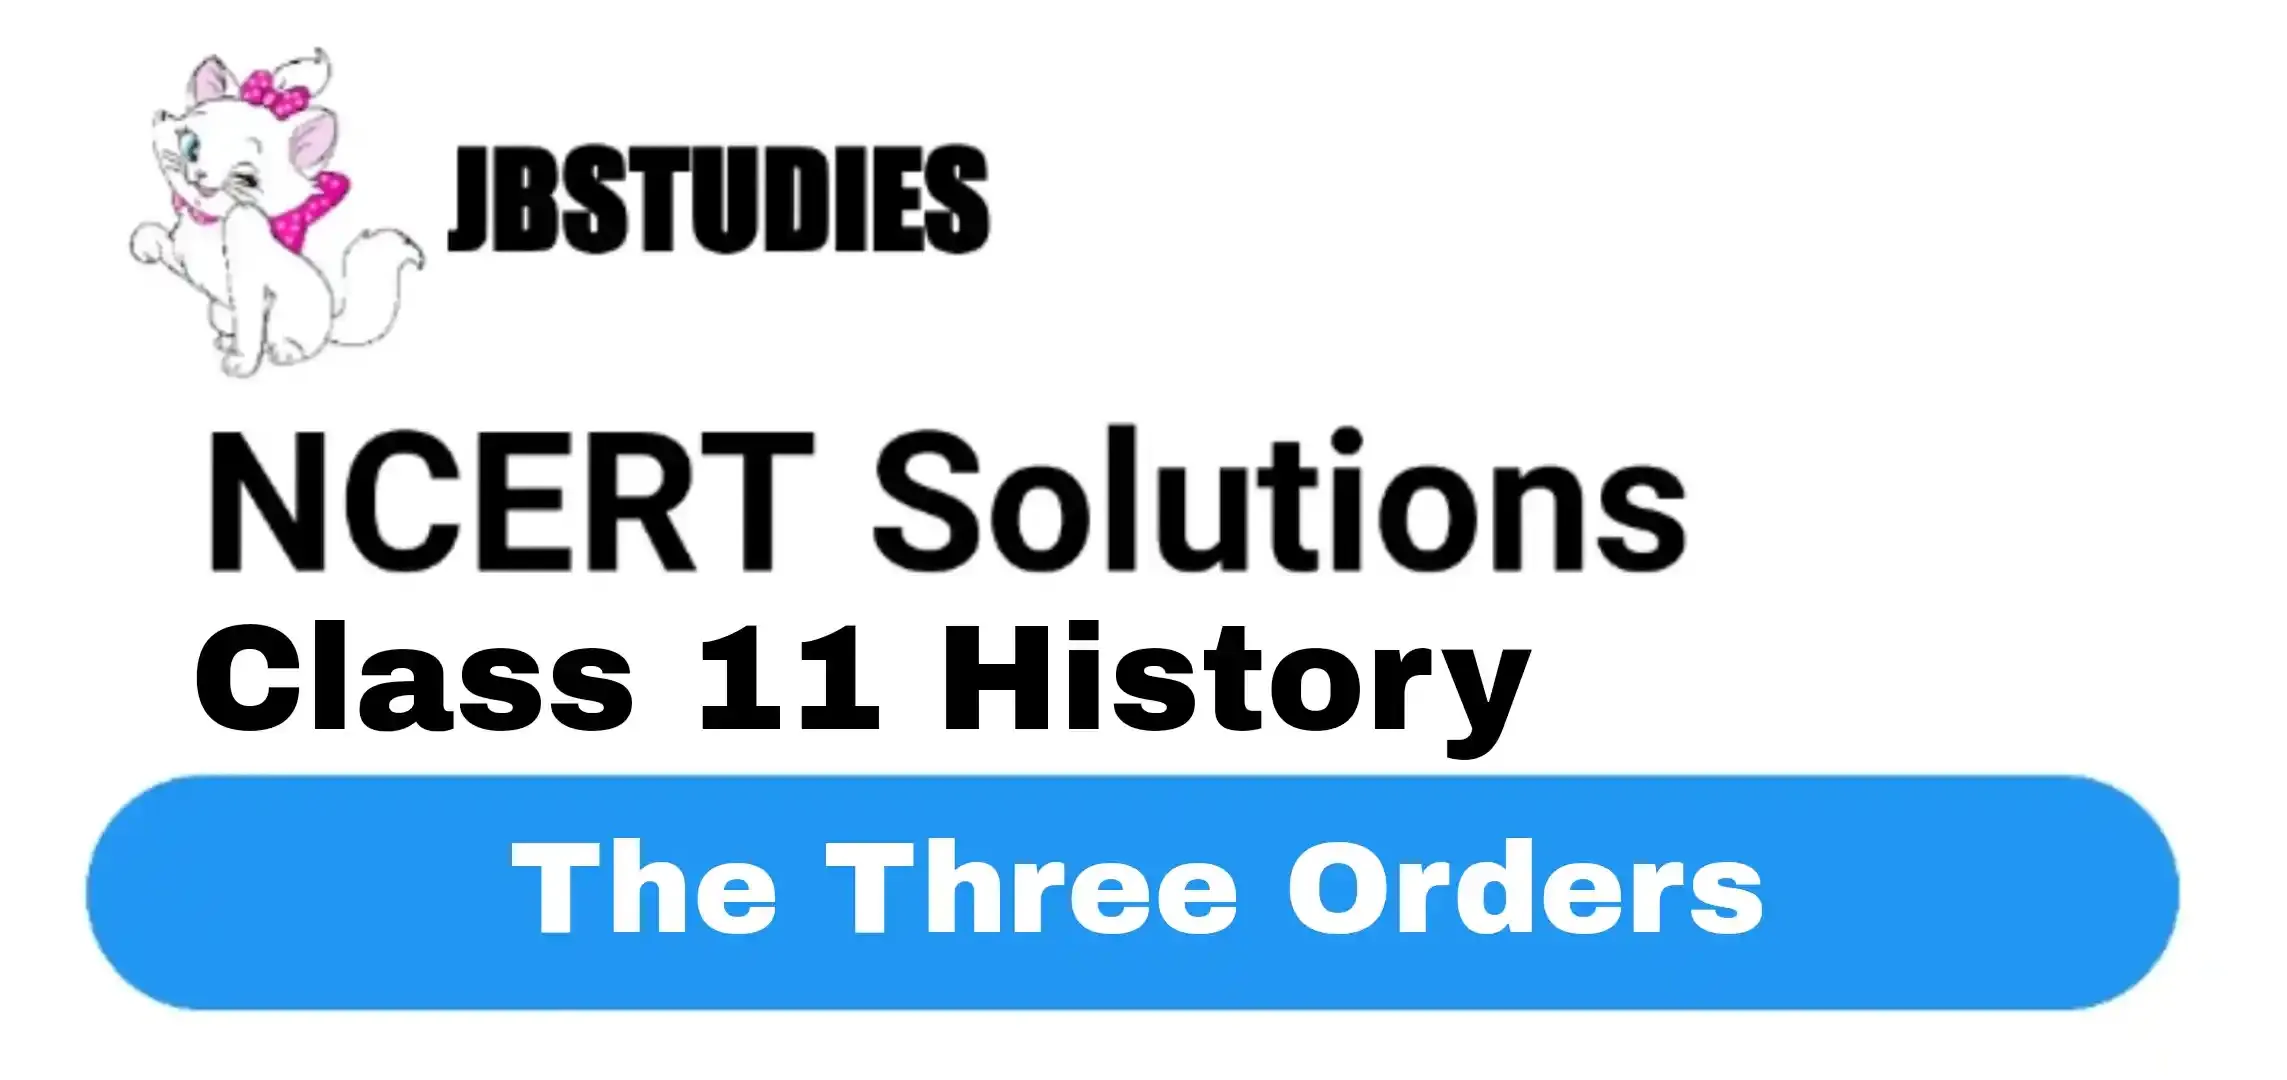 NCERT Solutions Class 11 History Chapter-6 The Three Orders